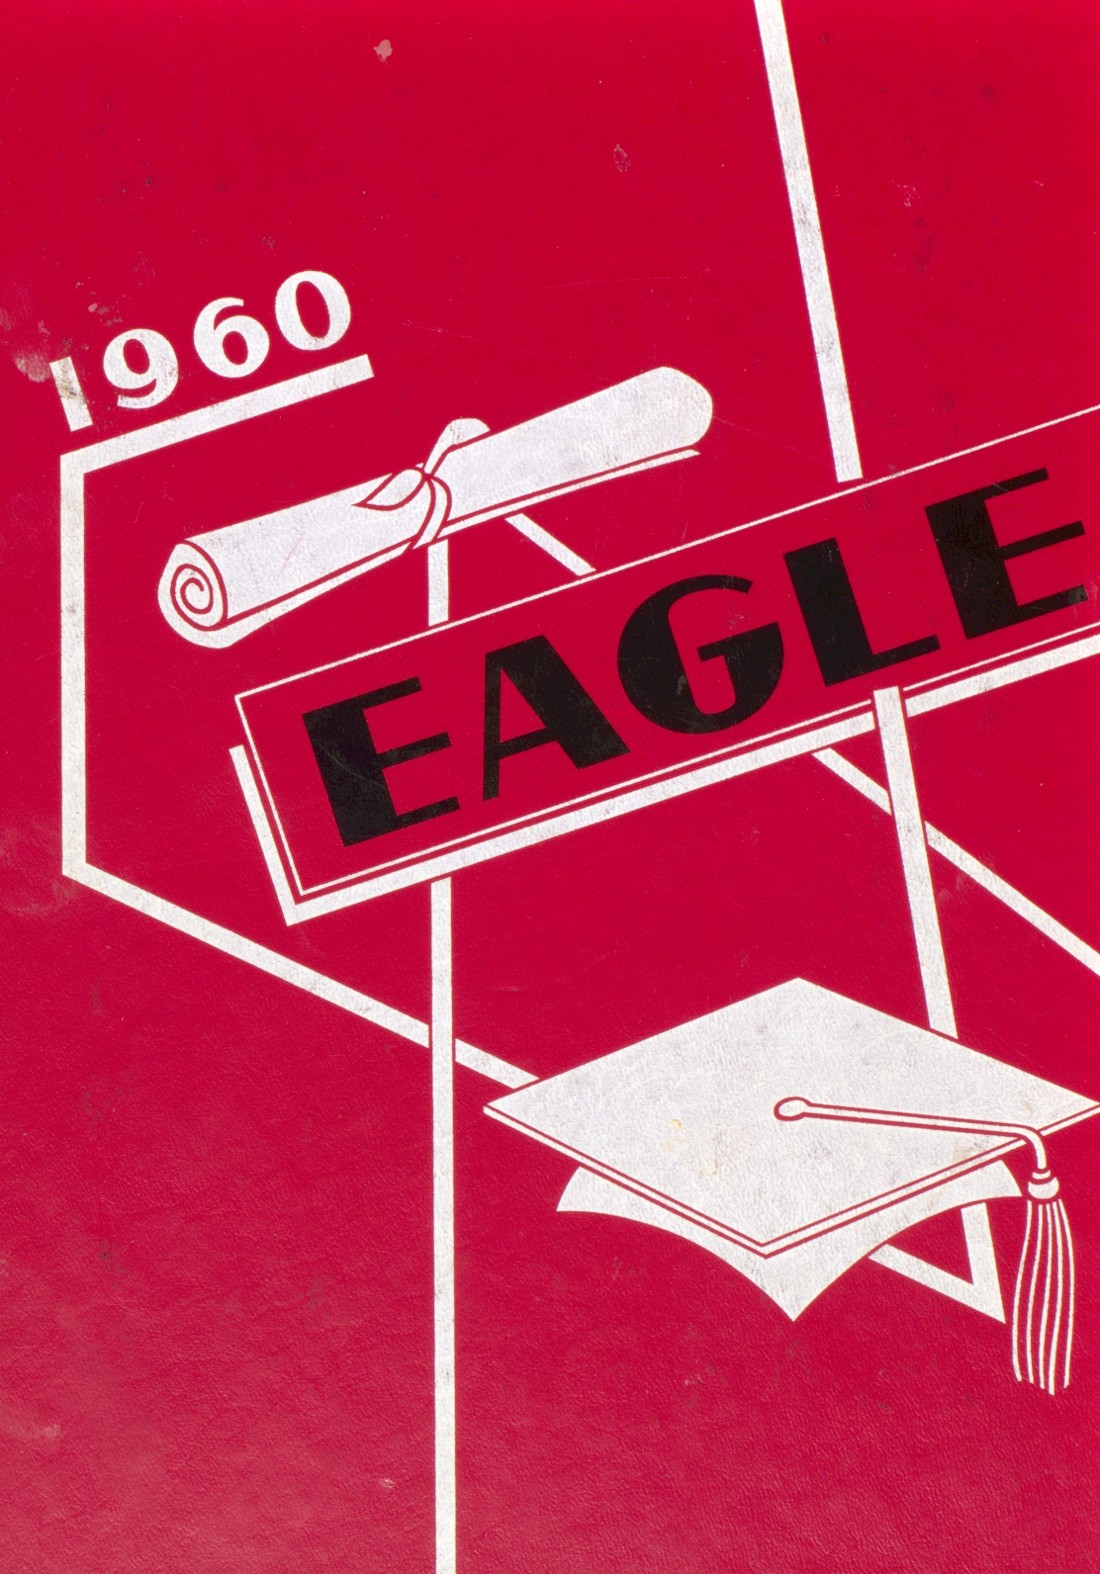 1960 Yearbook From Emery High School From Emery South Dakota For Sale